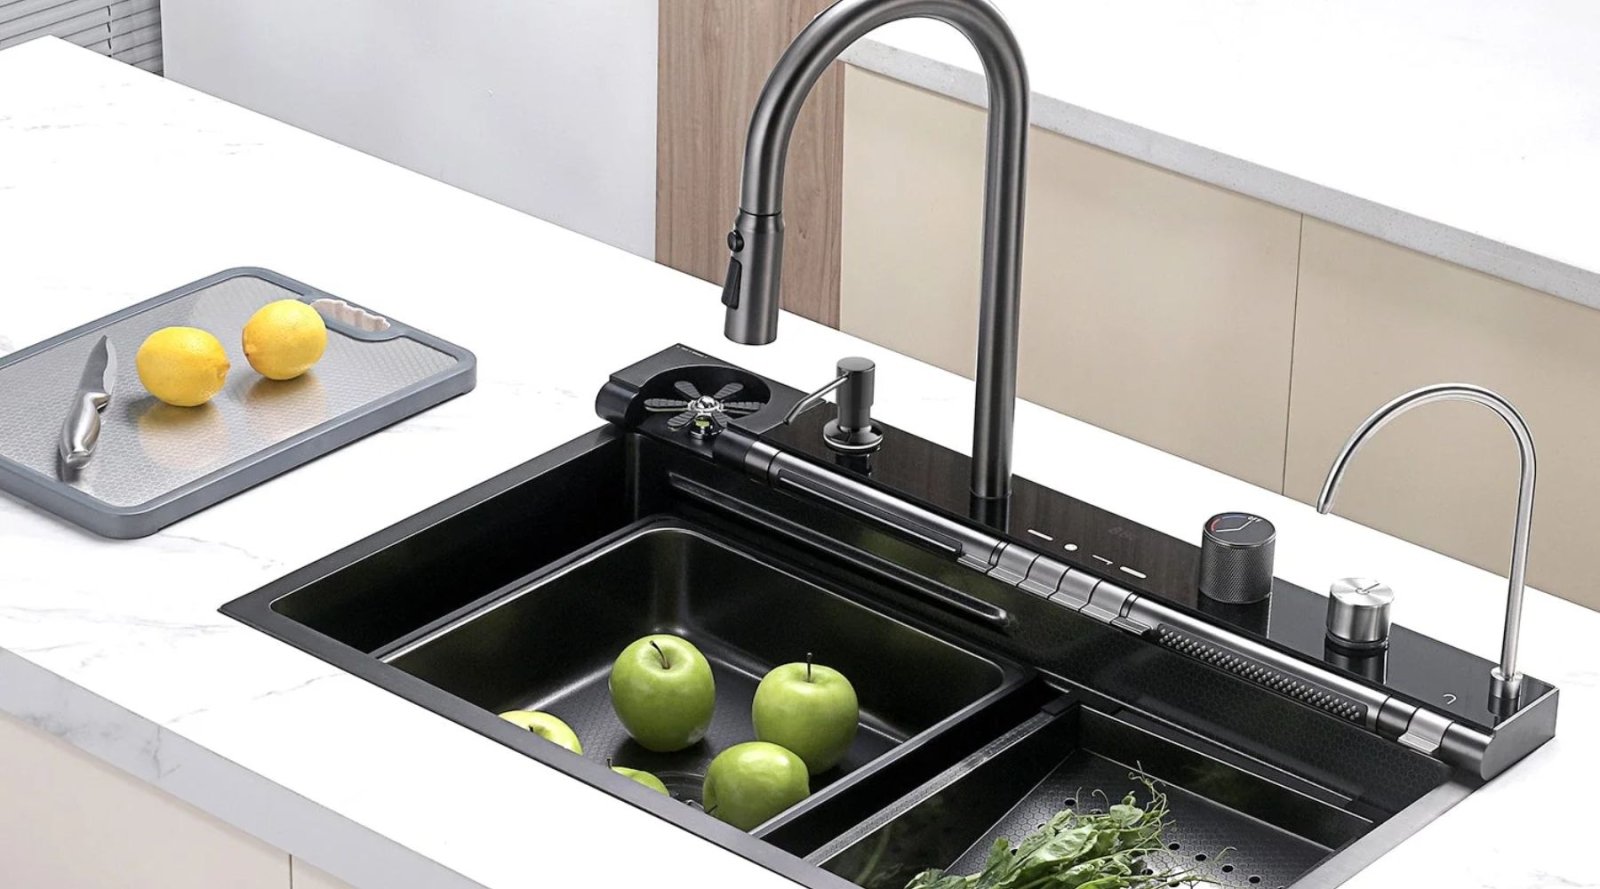 How to Fix Low Water Pressure in Your Kitchen Sink? - Lefton Home